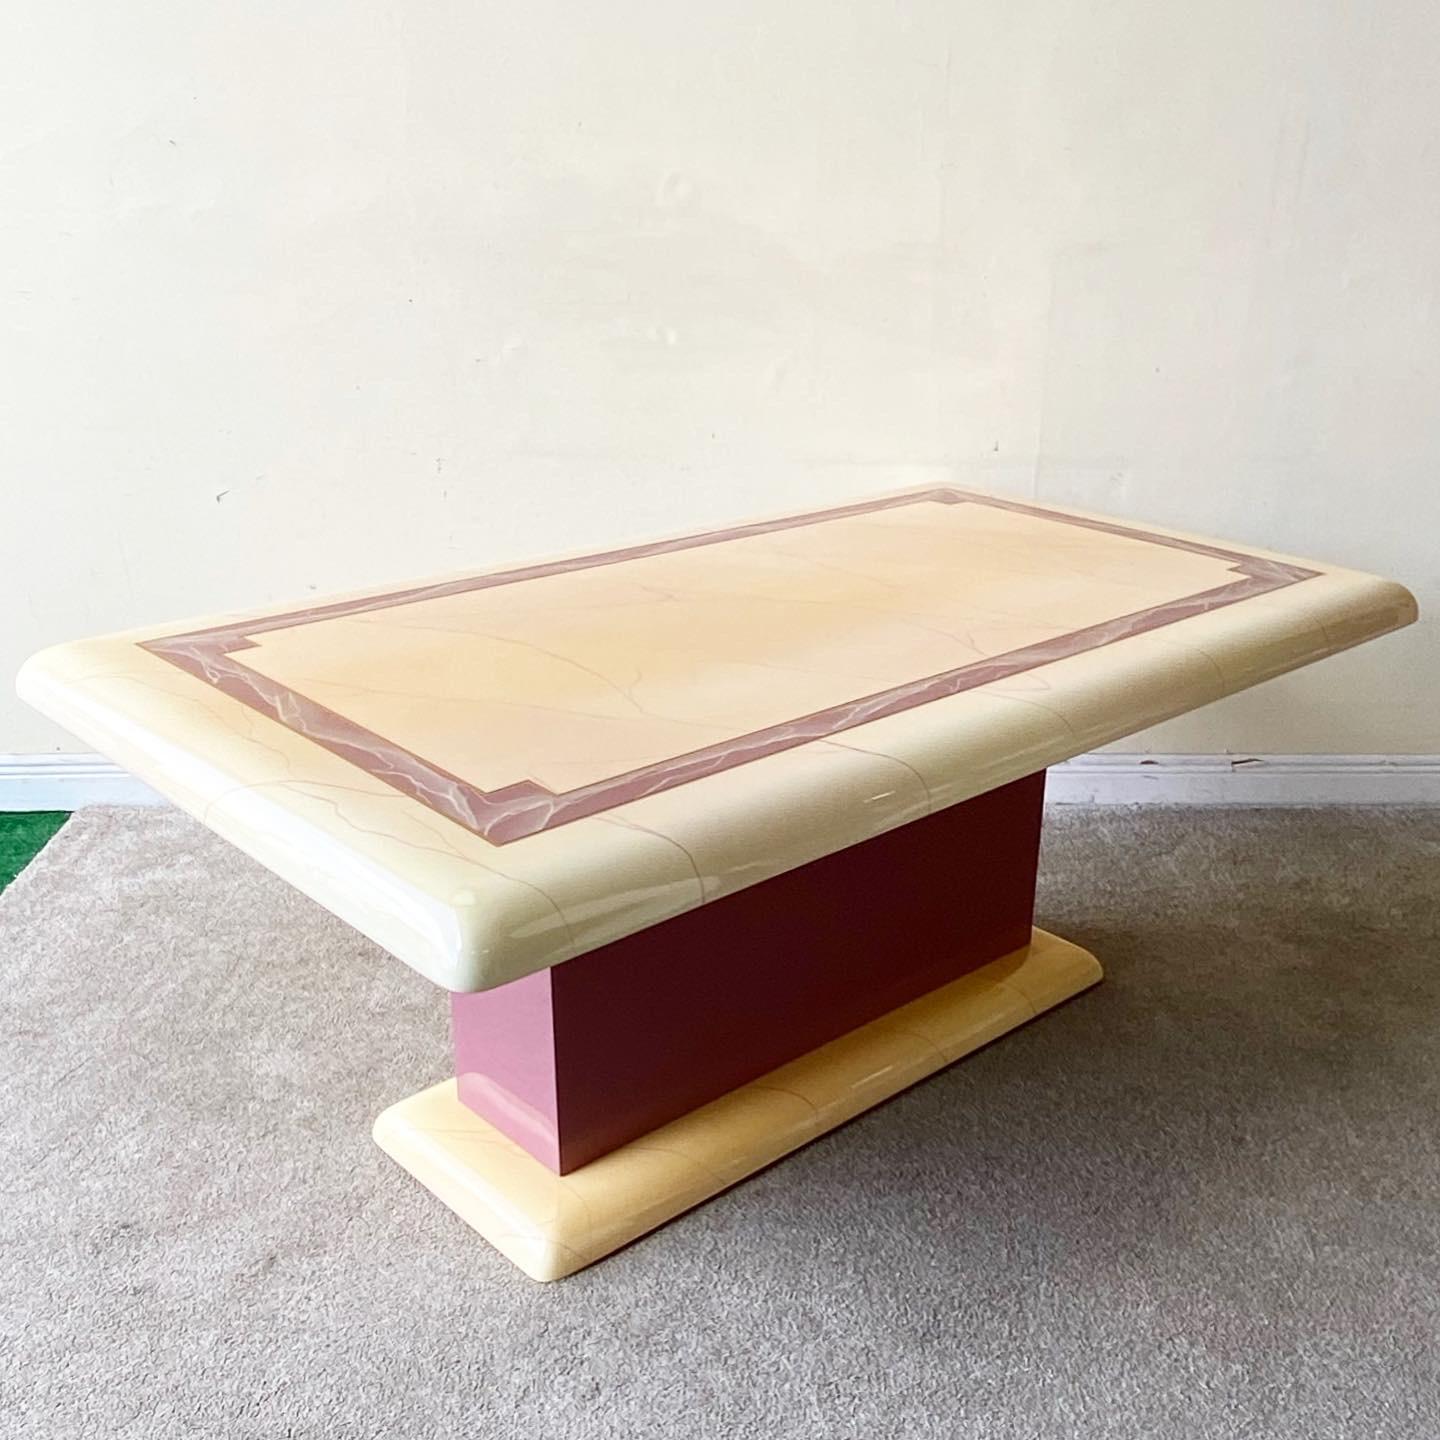 Fabulous Art Deco 1980s dining table. The table features waterfall edges and a pink and gold inlay. The wooden table was finished an epoxy coating over the top. The pedestal is a pink lacquer laminate.

Additional information:
Material: